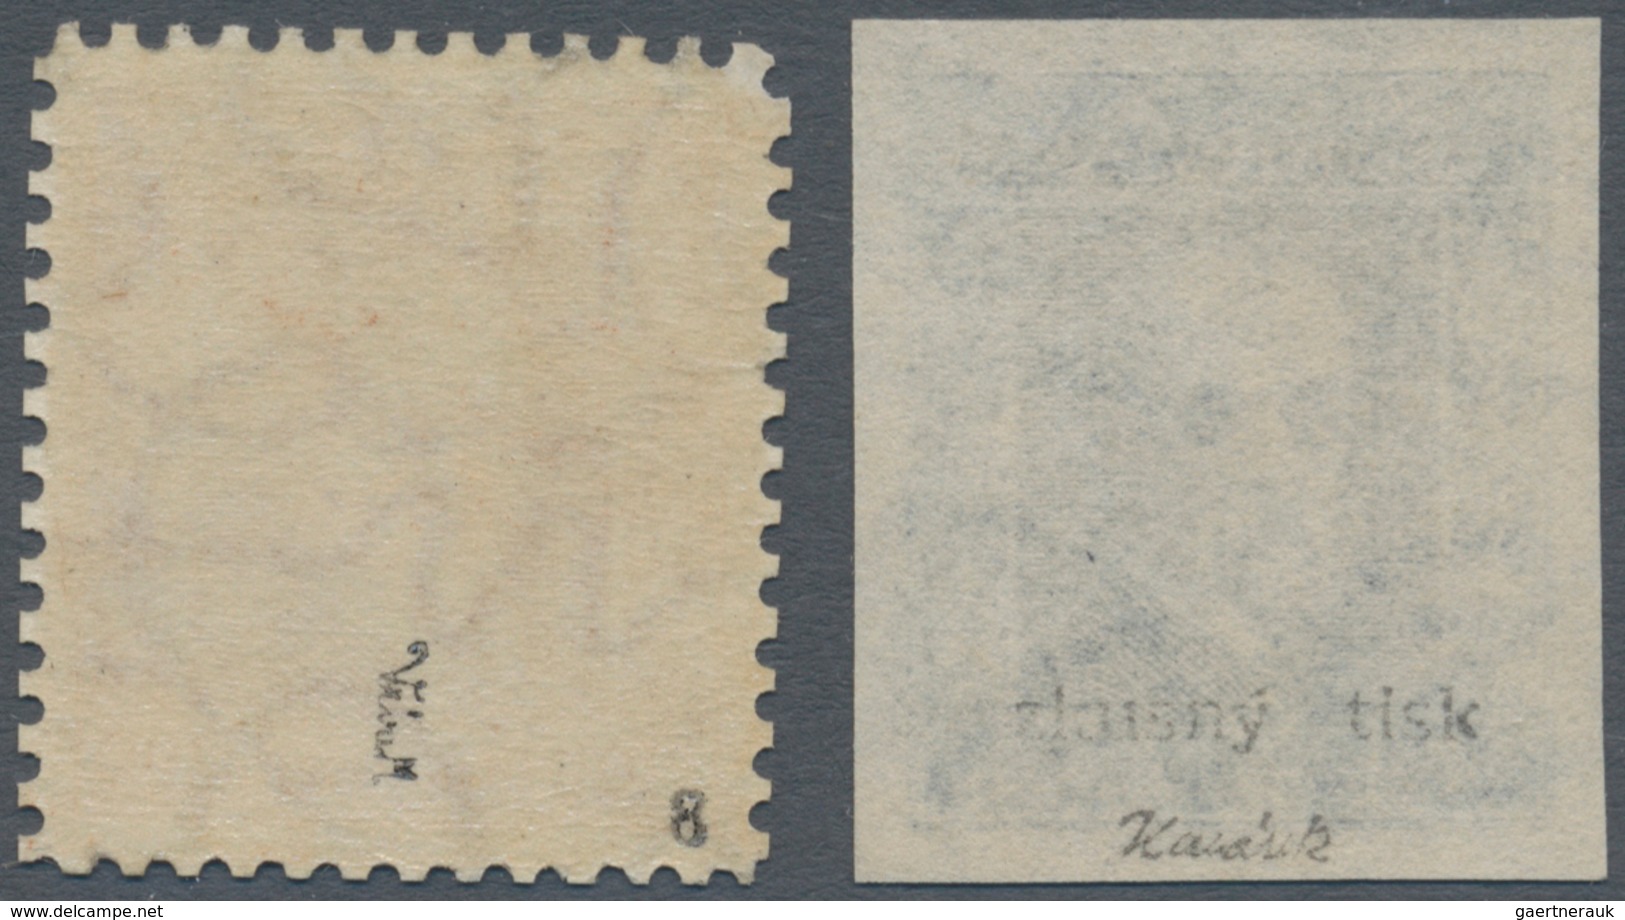 01721 Tschechoslowakei: 1923, 5th Anniversary Of Republic 200h.+200h. "Masaryk", Two Proofs In Issued Desi - Covers & Documents